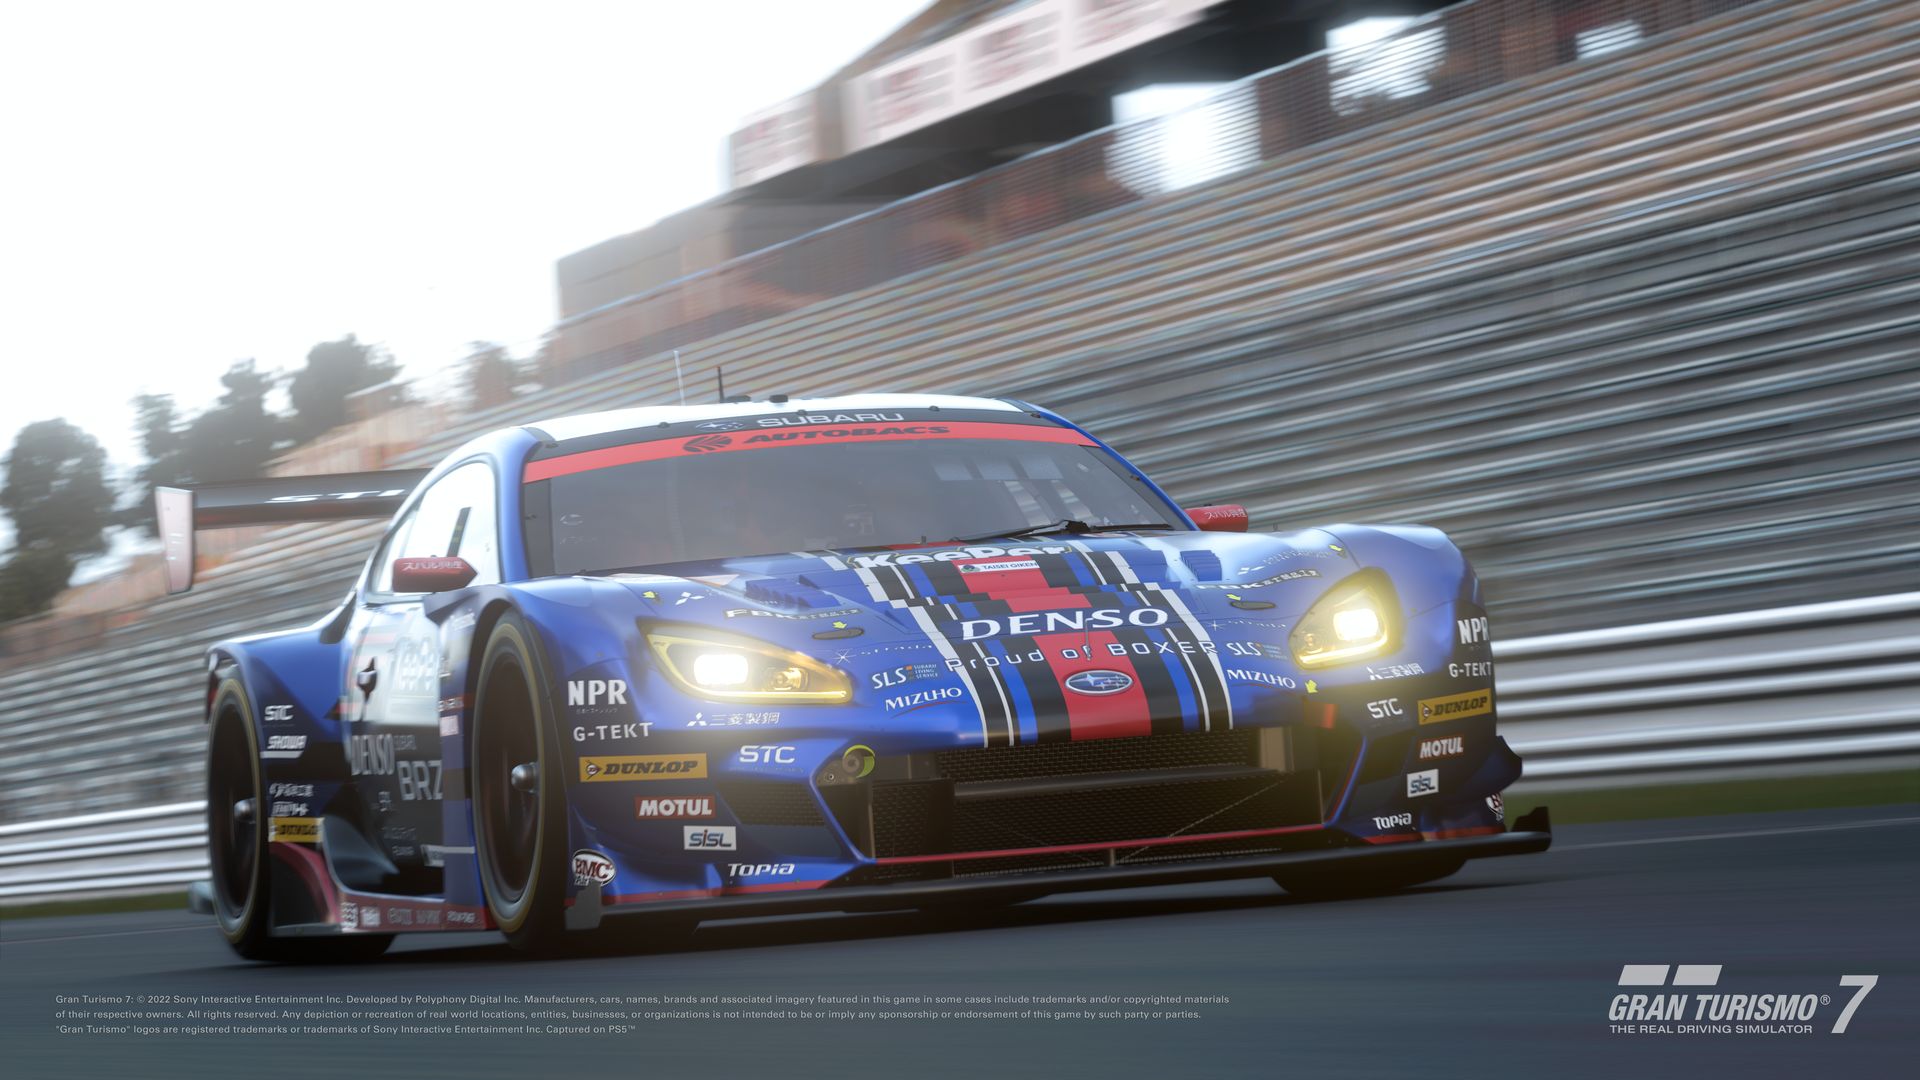 Gran Turismo 7 1.13 update is now available